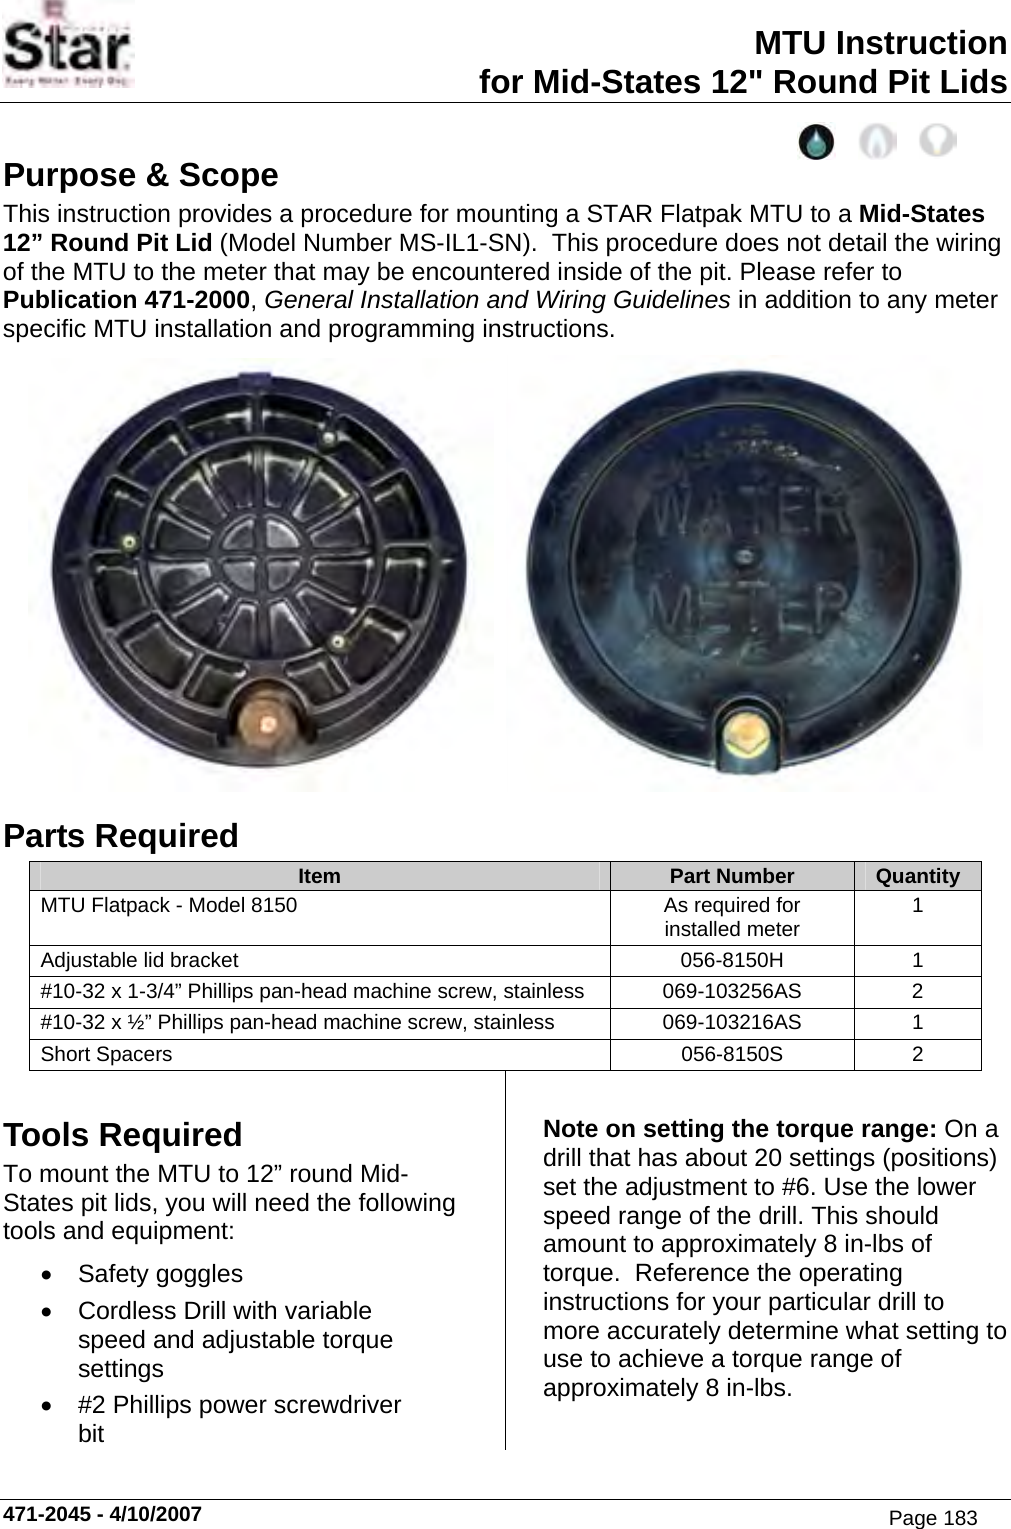 MTU Instruction for Mid-States 12&quot; Round Pit Lids Purpose &amp; Scope This instruction provides a procedure for mounting a STAR Flatpak MTU to a Mid-States 12” Round Pit Lid (Model Number MS-IL1-SN).  This procedure does not detail the wiring of the MTU to the meter that may be encountered inside of the pit. Please refer to Publication 471-2000, General Installation and Wiring Guidelines in addition to any meter specific MTU installation and programming instructions.     Parts Required Item  Part Number  Quantity MTU Flatpack - Model 8150  As required for installed meter  1 Adjustable lid bracket  056-8150H  1 #10-32 x 1-3/4” Phillips pan-head machine screw, stainless  069-103256AS  2 #10-32 x ½” Phillips pan-head machine screw, stainless  069-103216AS  1 Short Spacers  056-8150S  2 Tools Required To mount the MTU to 12” round Mid-States pit lids, you will need the following tools and equipment: • Safety goggles •  Cordless Drill with variable speed and adjustable torque settings •  #2 Phillips power screwdriver bit Note on setting the torque range: On a drill that has about 20 settings (positions) set the adjustment to #6. Use the lower speed range of the drill. This should amount to approximately 8 in-lbs of torque.  Reference the operating instructions for your particular drill to more accurately determine what setting to use to achieve a torque range of approximately 8 in-lbs. 471-2045 - 4/10/2007 Page 183